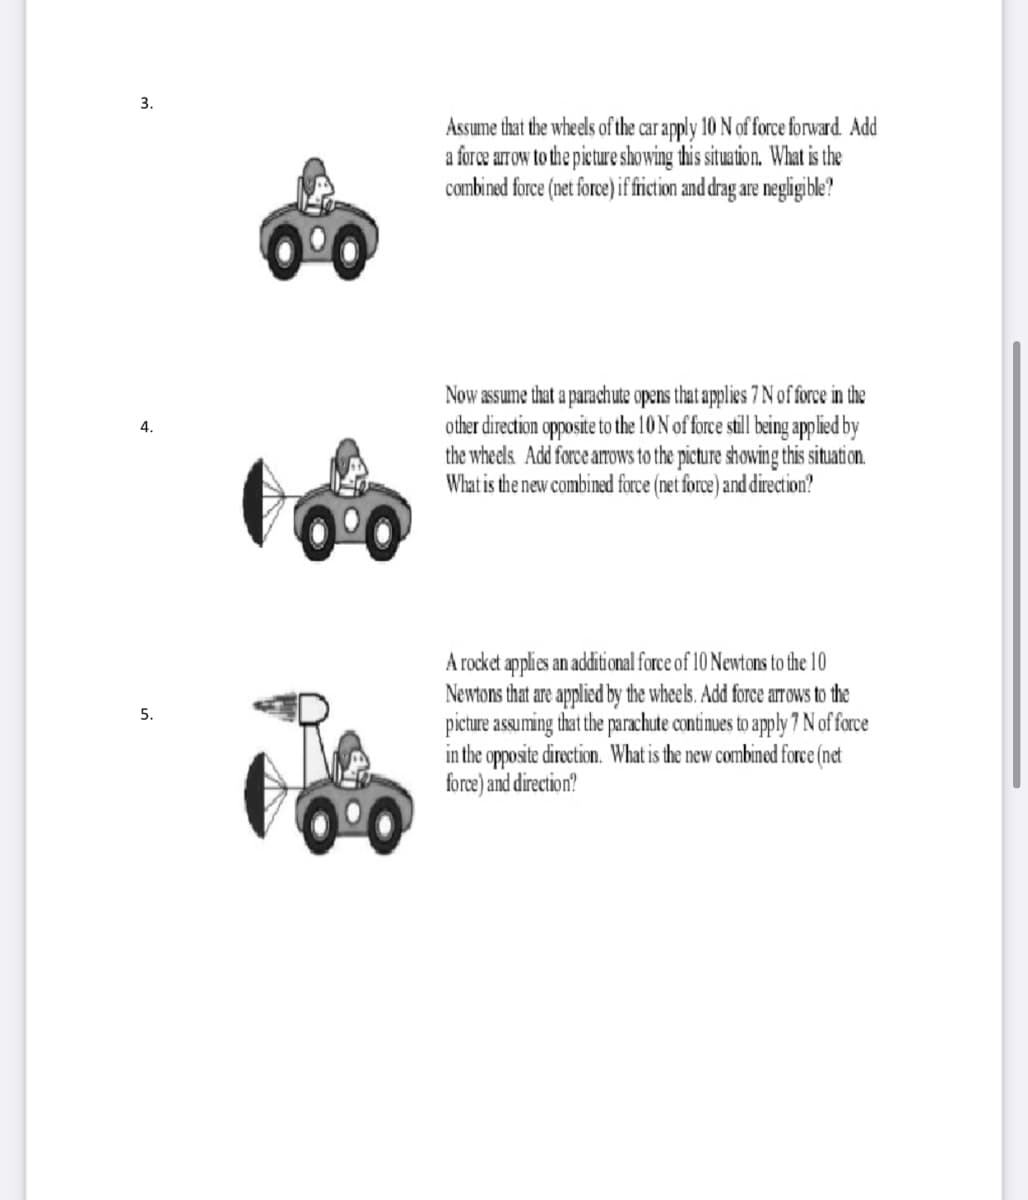 3.
Assume that the wheels of the car apply 10 N of force forward. Add
a force arrow to the pieture showing this situation. What is the
combined force (net fore) if fiction and drag are negligible?
Now assume that a parachute opens that applies 7 N of force in the
other direction opposite to the 10 N of force still being applied by
the wheels Add force arrows to the picture showing this situati on.
What is the new combined force (net force) and direction?
4.
A rocket applies an additional force of 10 Newtons to the 10
Newtons that are applied by the wheels. Add force arrOws to the
picture assuming that the parachute continues to apply 7 N of force
in the opposite direction. What is the new combined force (net
force) and direction?
5.
